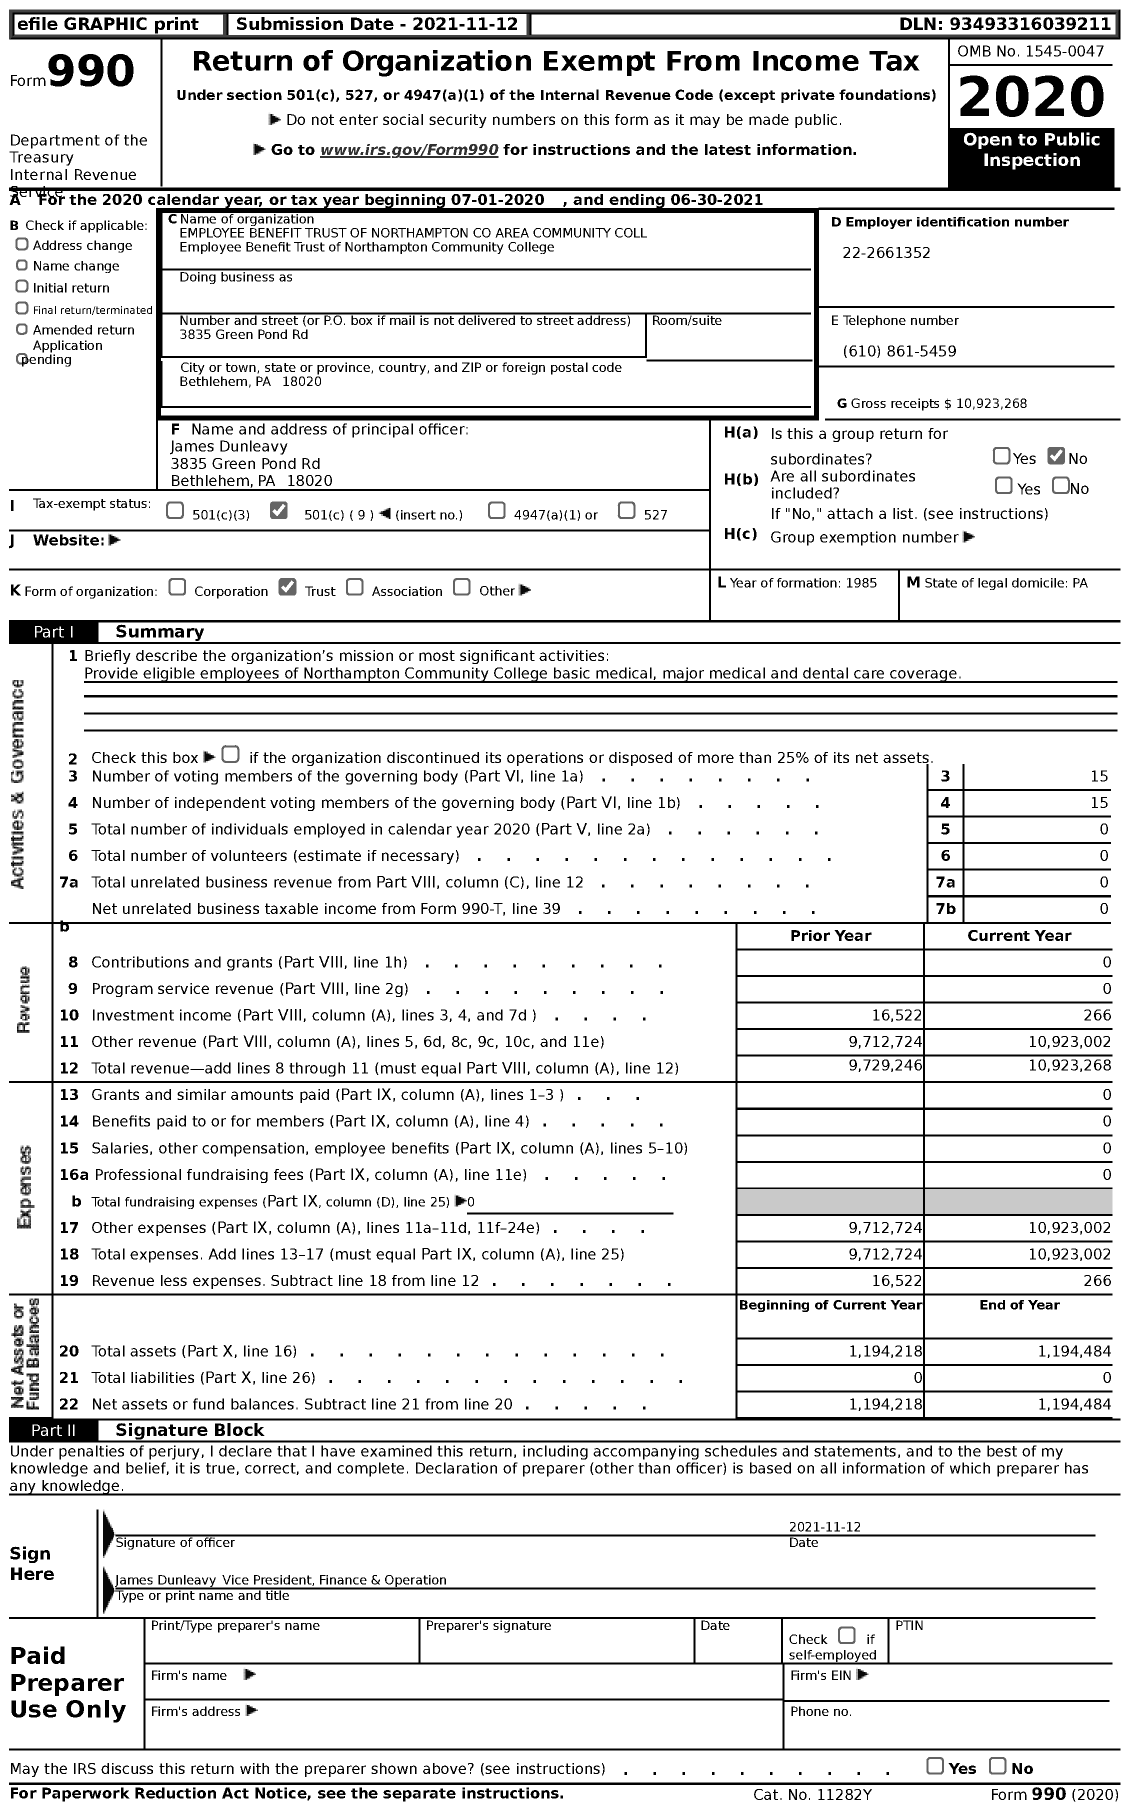 Image of first page of 2020 Form 990 for Employee Benefit TRUST of Northampton COMMUNITY AREA COMMUNITY College